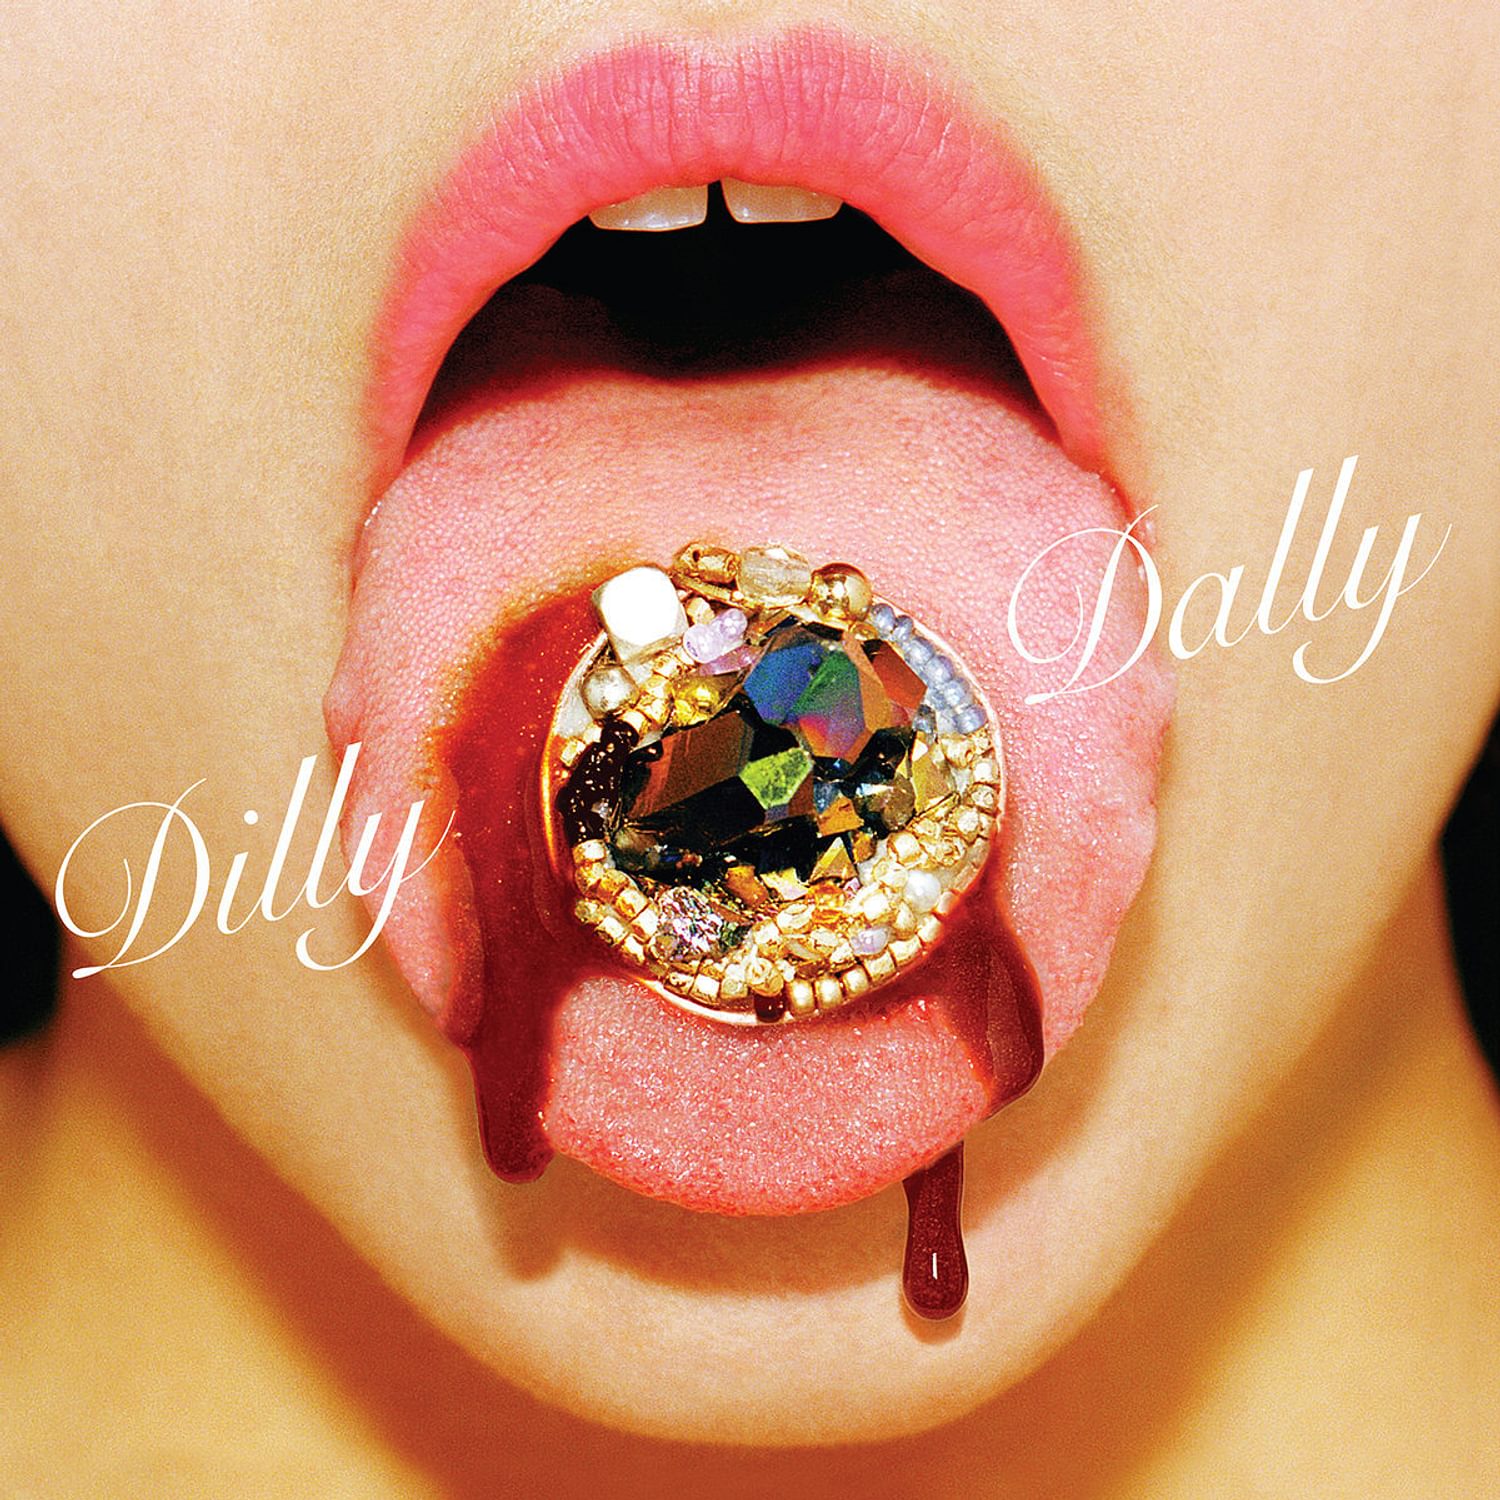 Dilly Dally - Sore